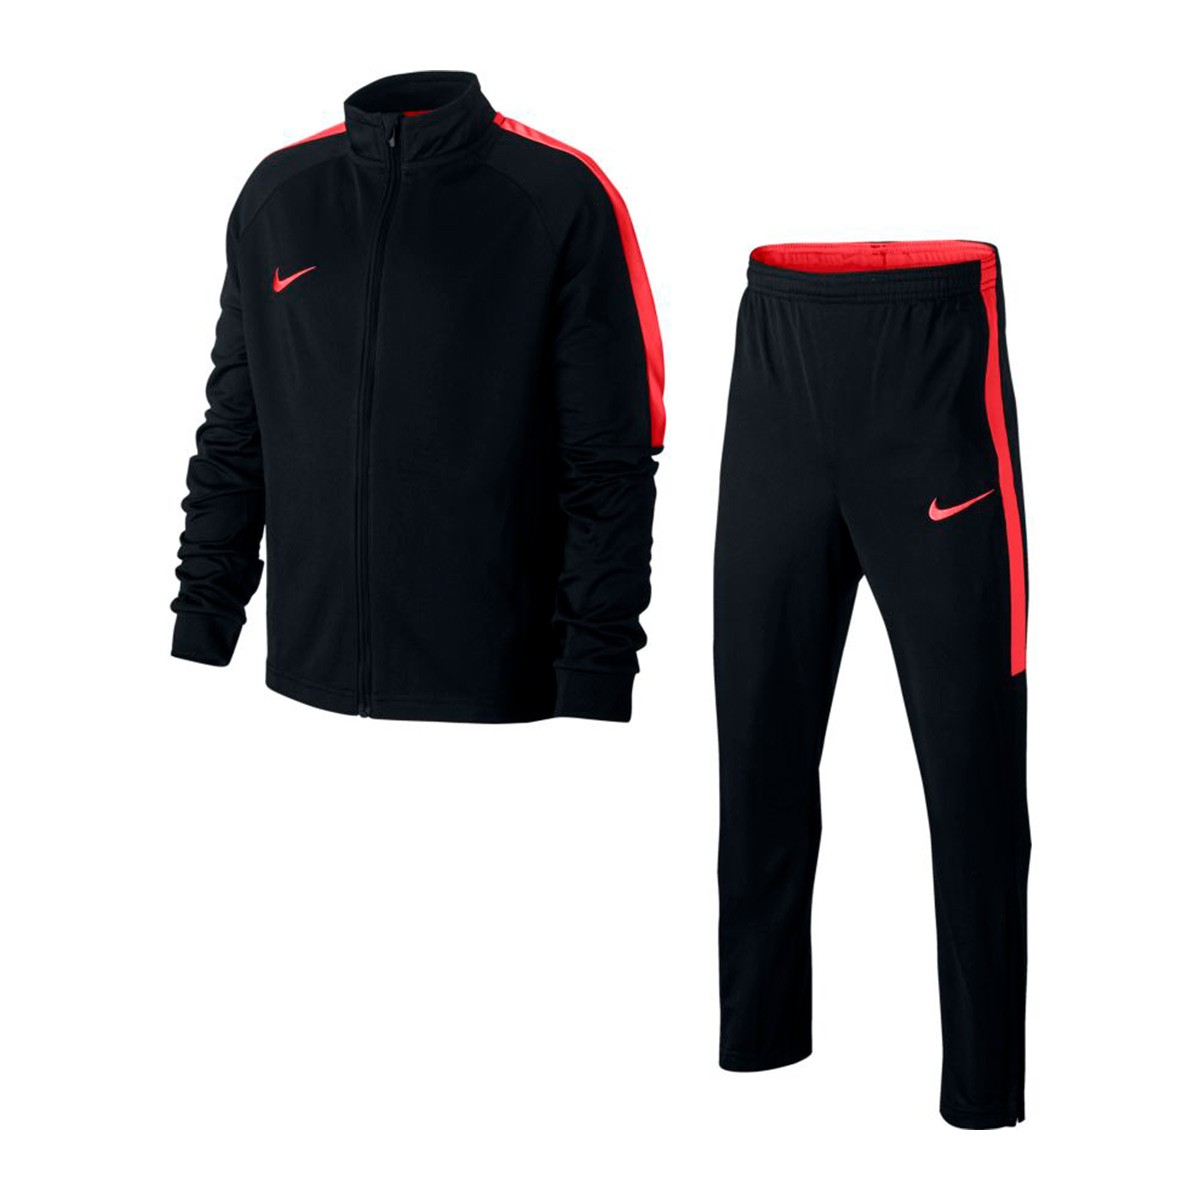 nike junior academy dry tracksuit buy clothes shoes online